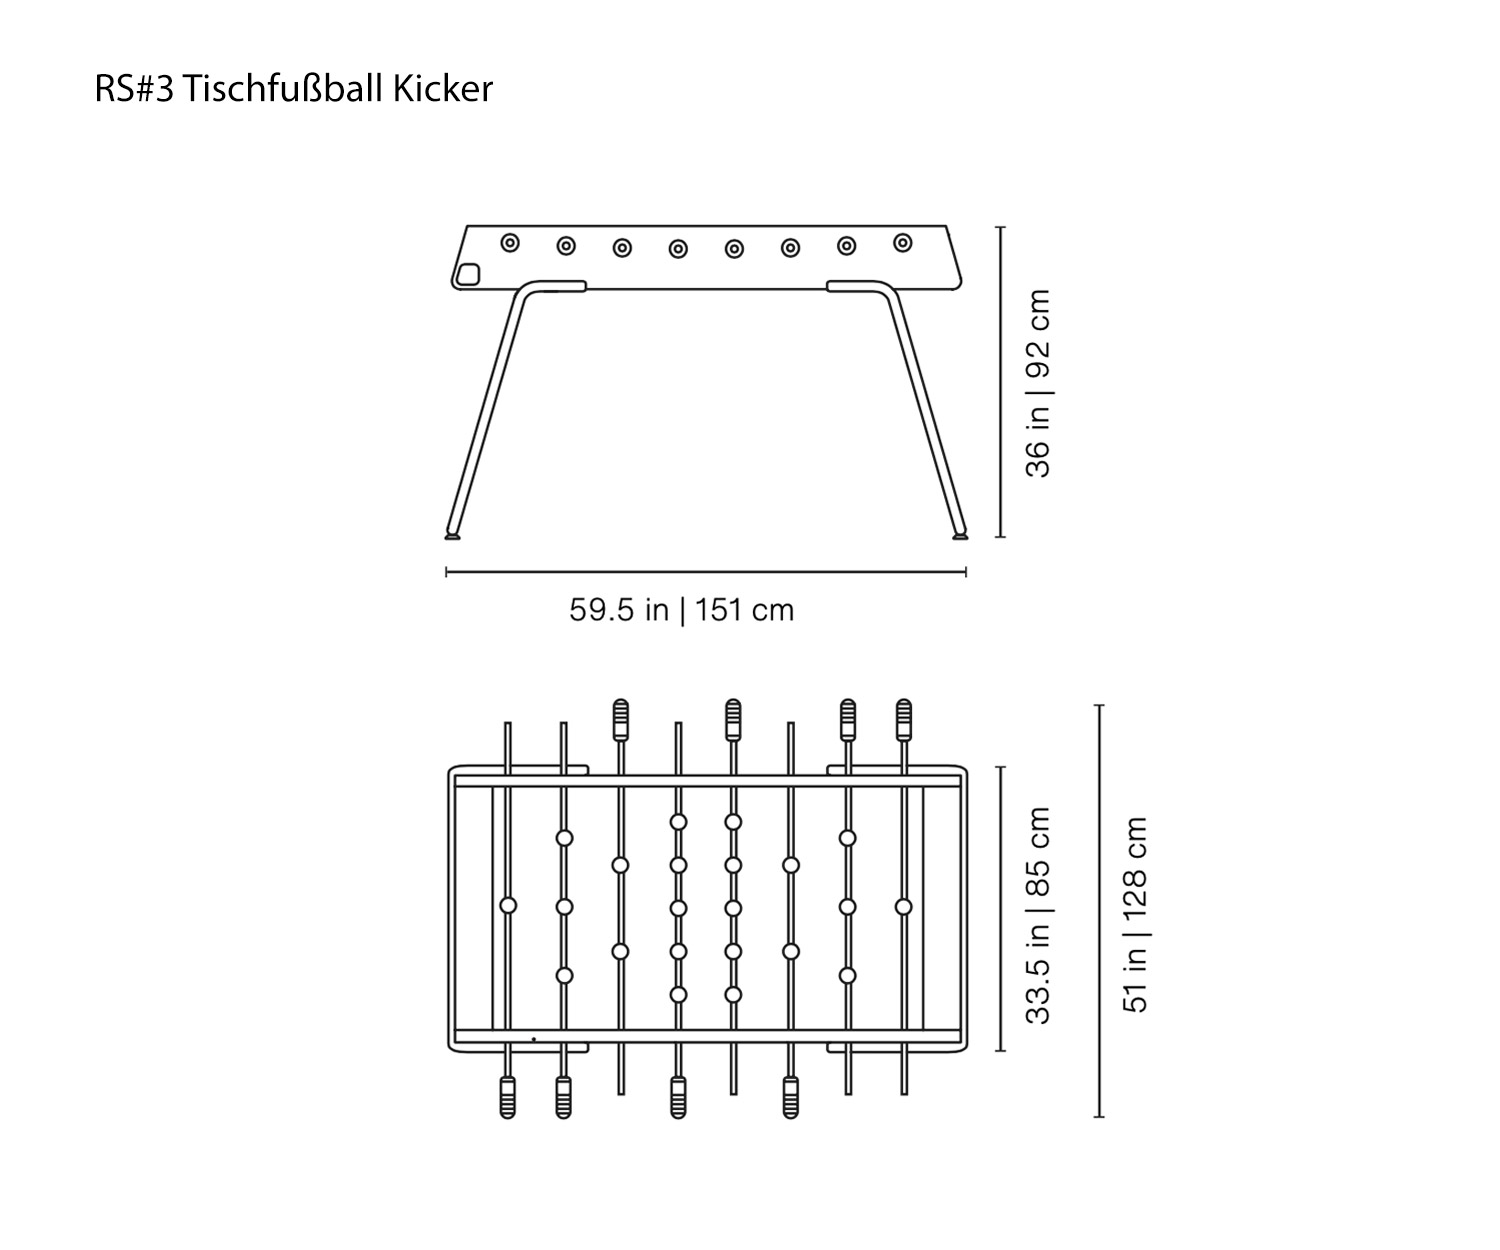 RS Barcelona Designer foosball table football RS#3 Sketch Dimensions Sizes Sizes